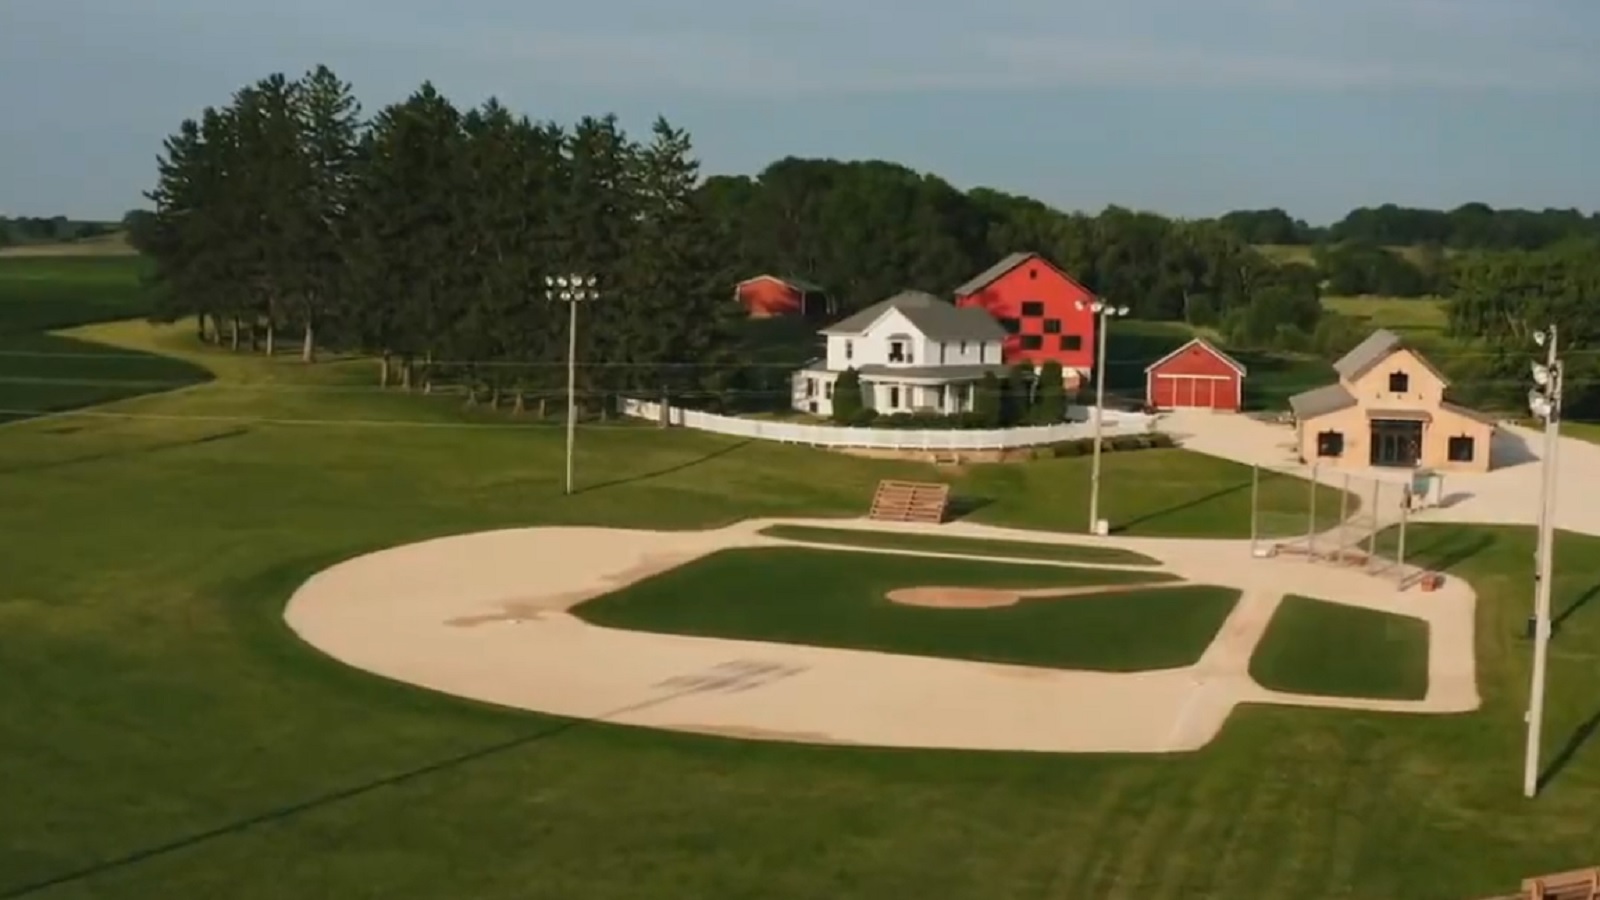 MLB game at Rickwood Field will not carry 'Field of Dreams' tag - WVUA 23